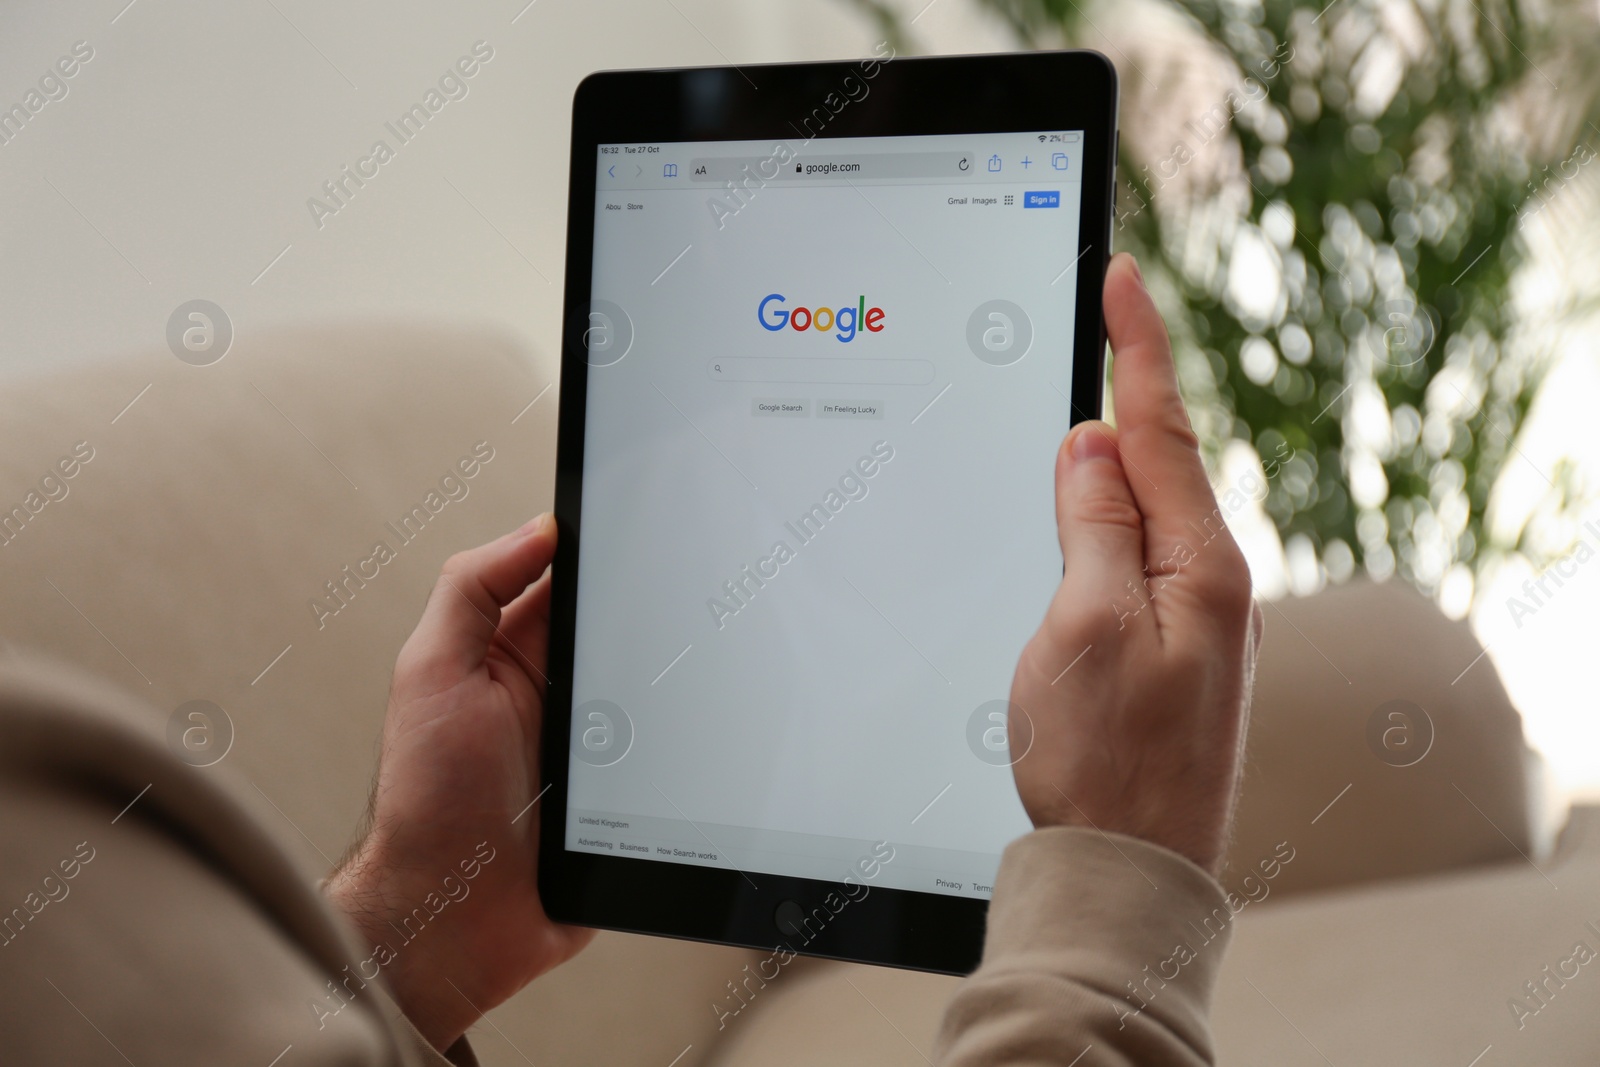 Photo of MYKOLAIV, UKRAINE - OCTOBER 27, 2020: Man using Google search engine on tablet against blurred background, closeup